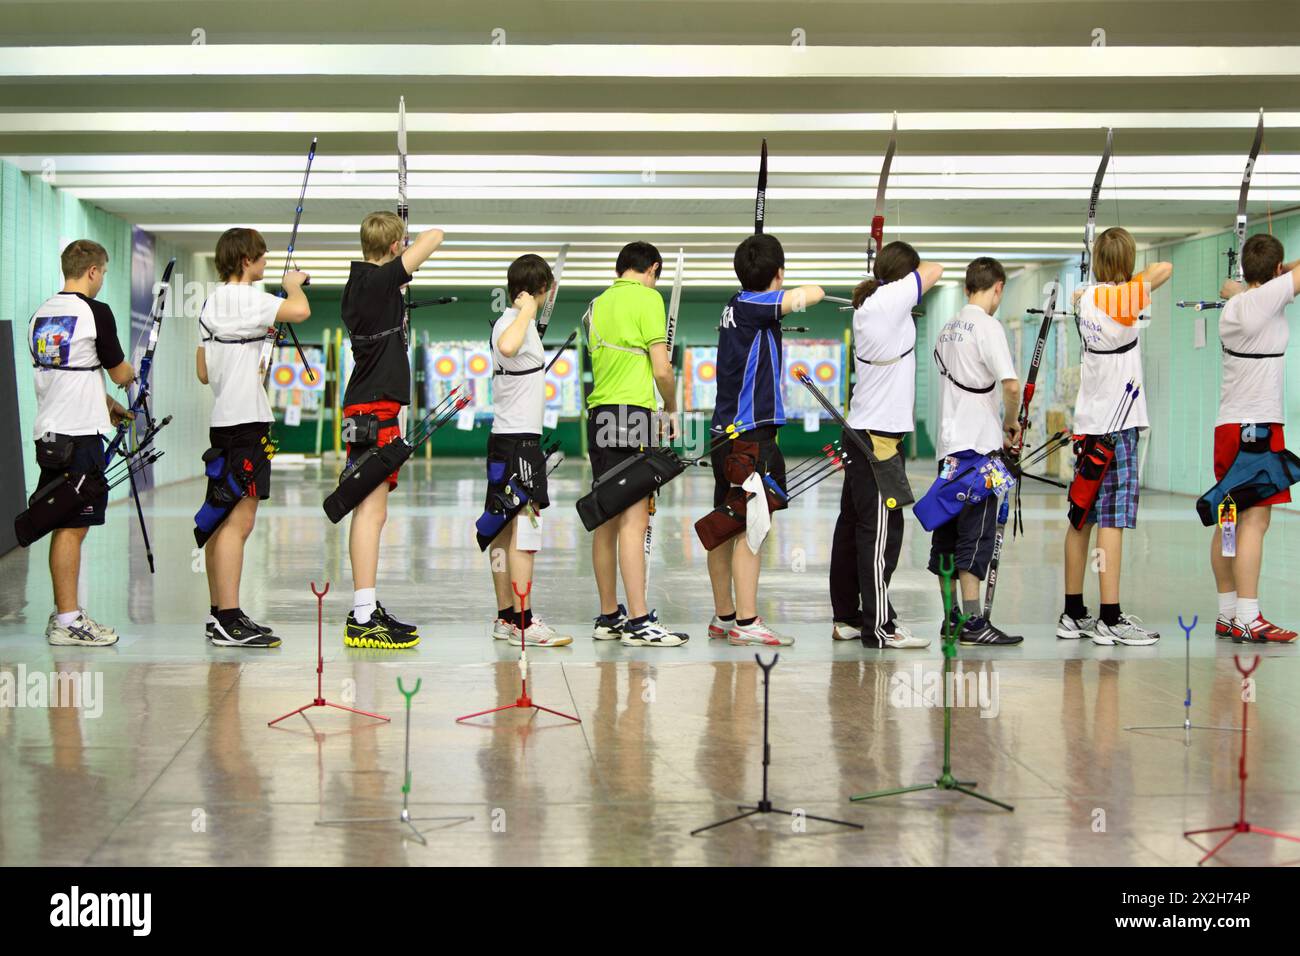 MOSCOW - APRIL 2: Backs of archers at Traditional Archery Championship among adults (undergraduate and graduate) of Russian Institute of Physical Educ Stock Photo